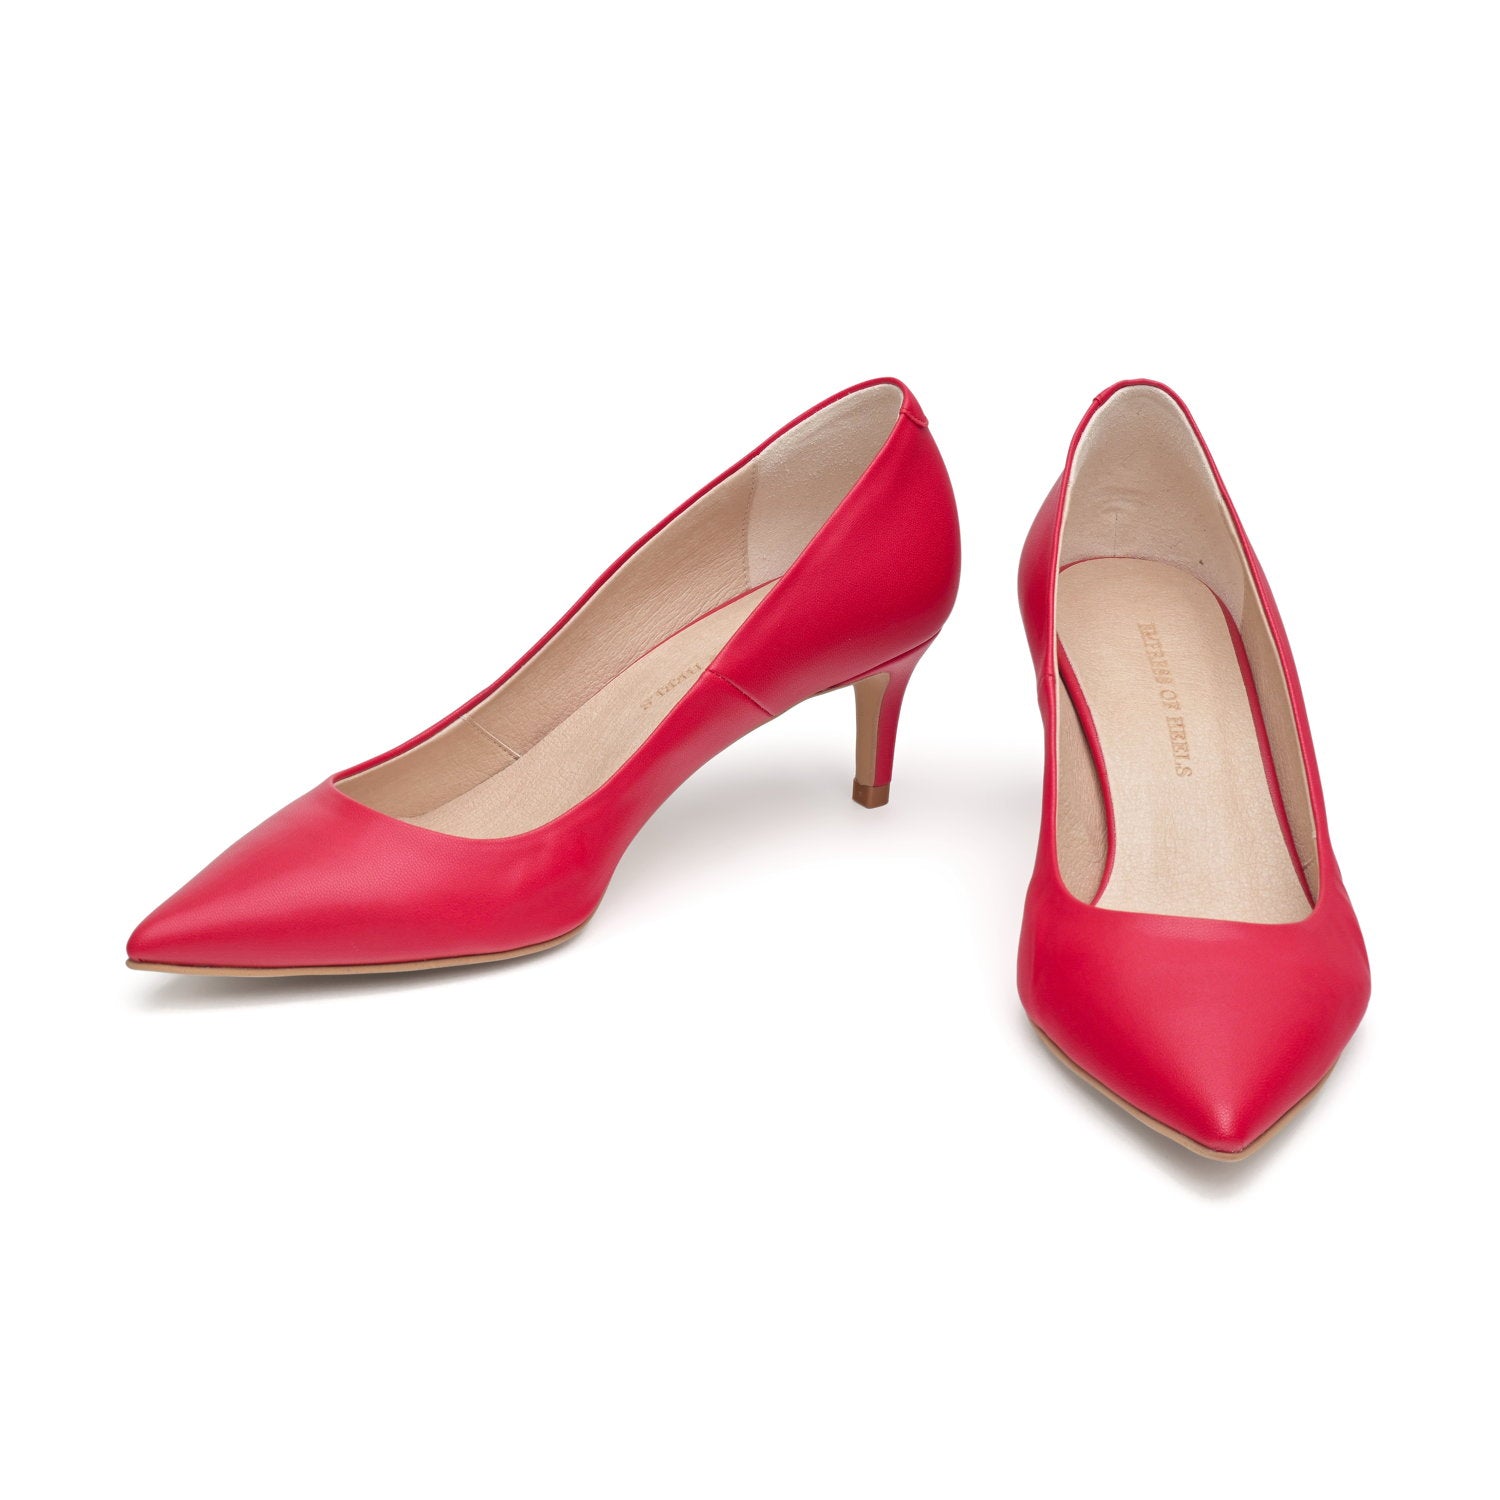 The Red – vegane 50mm Pumps